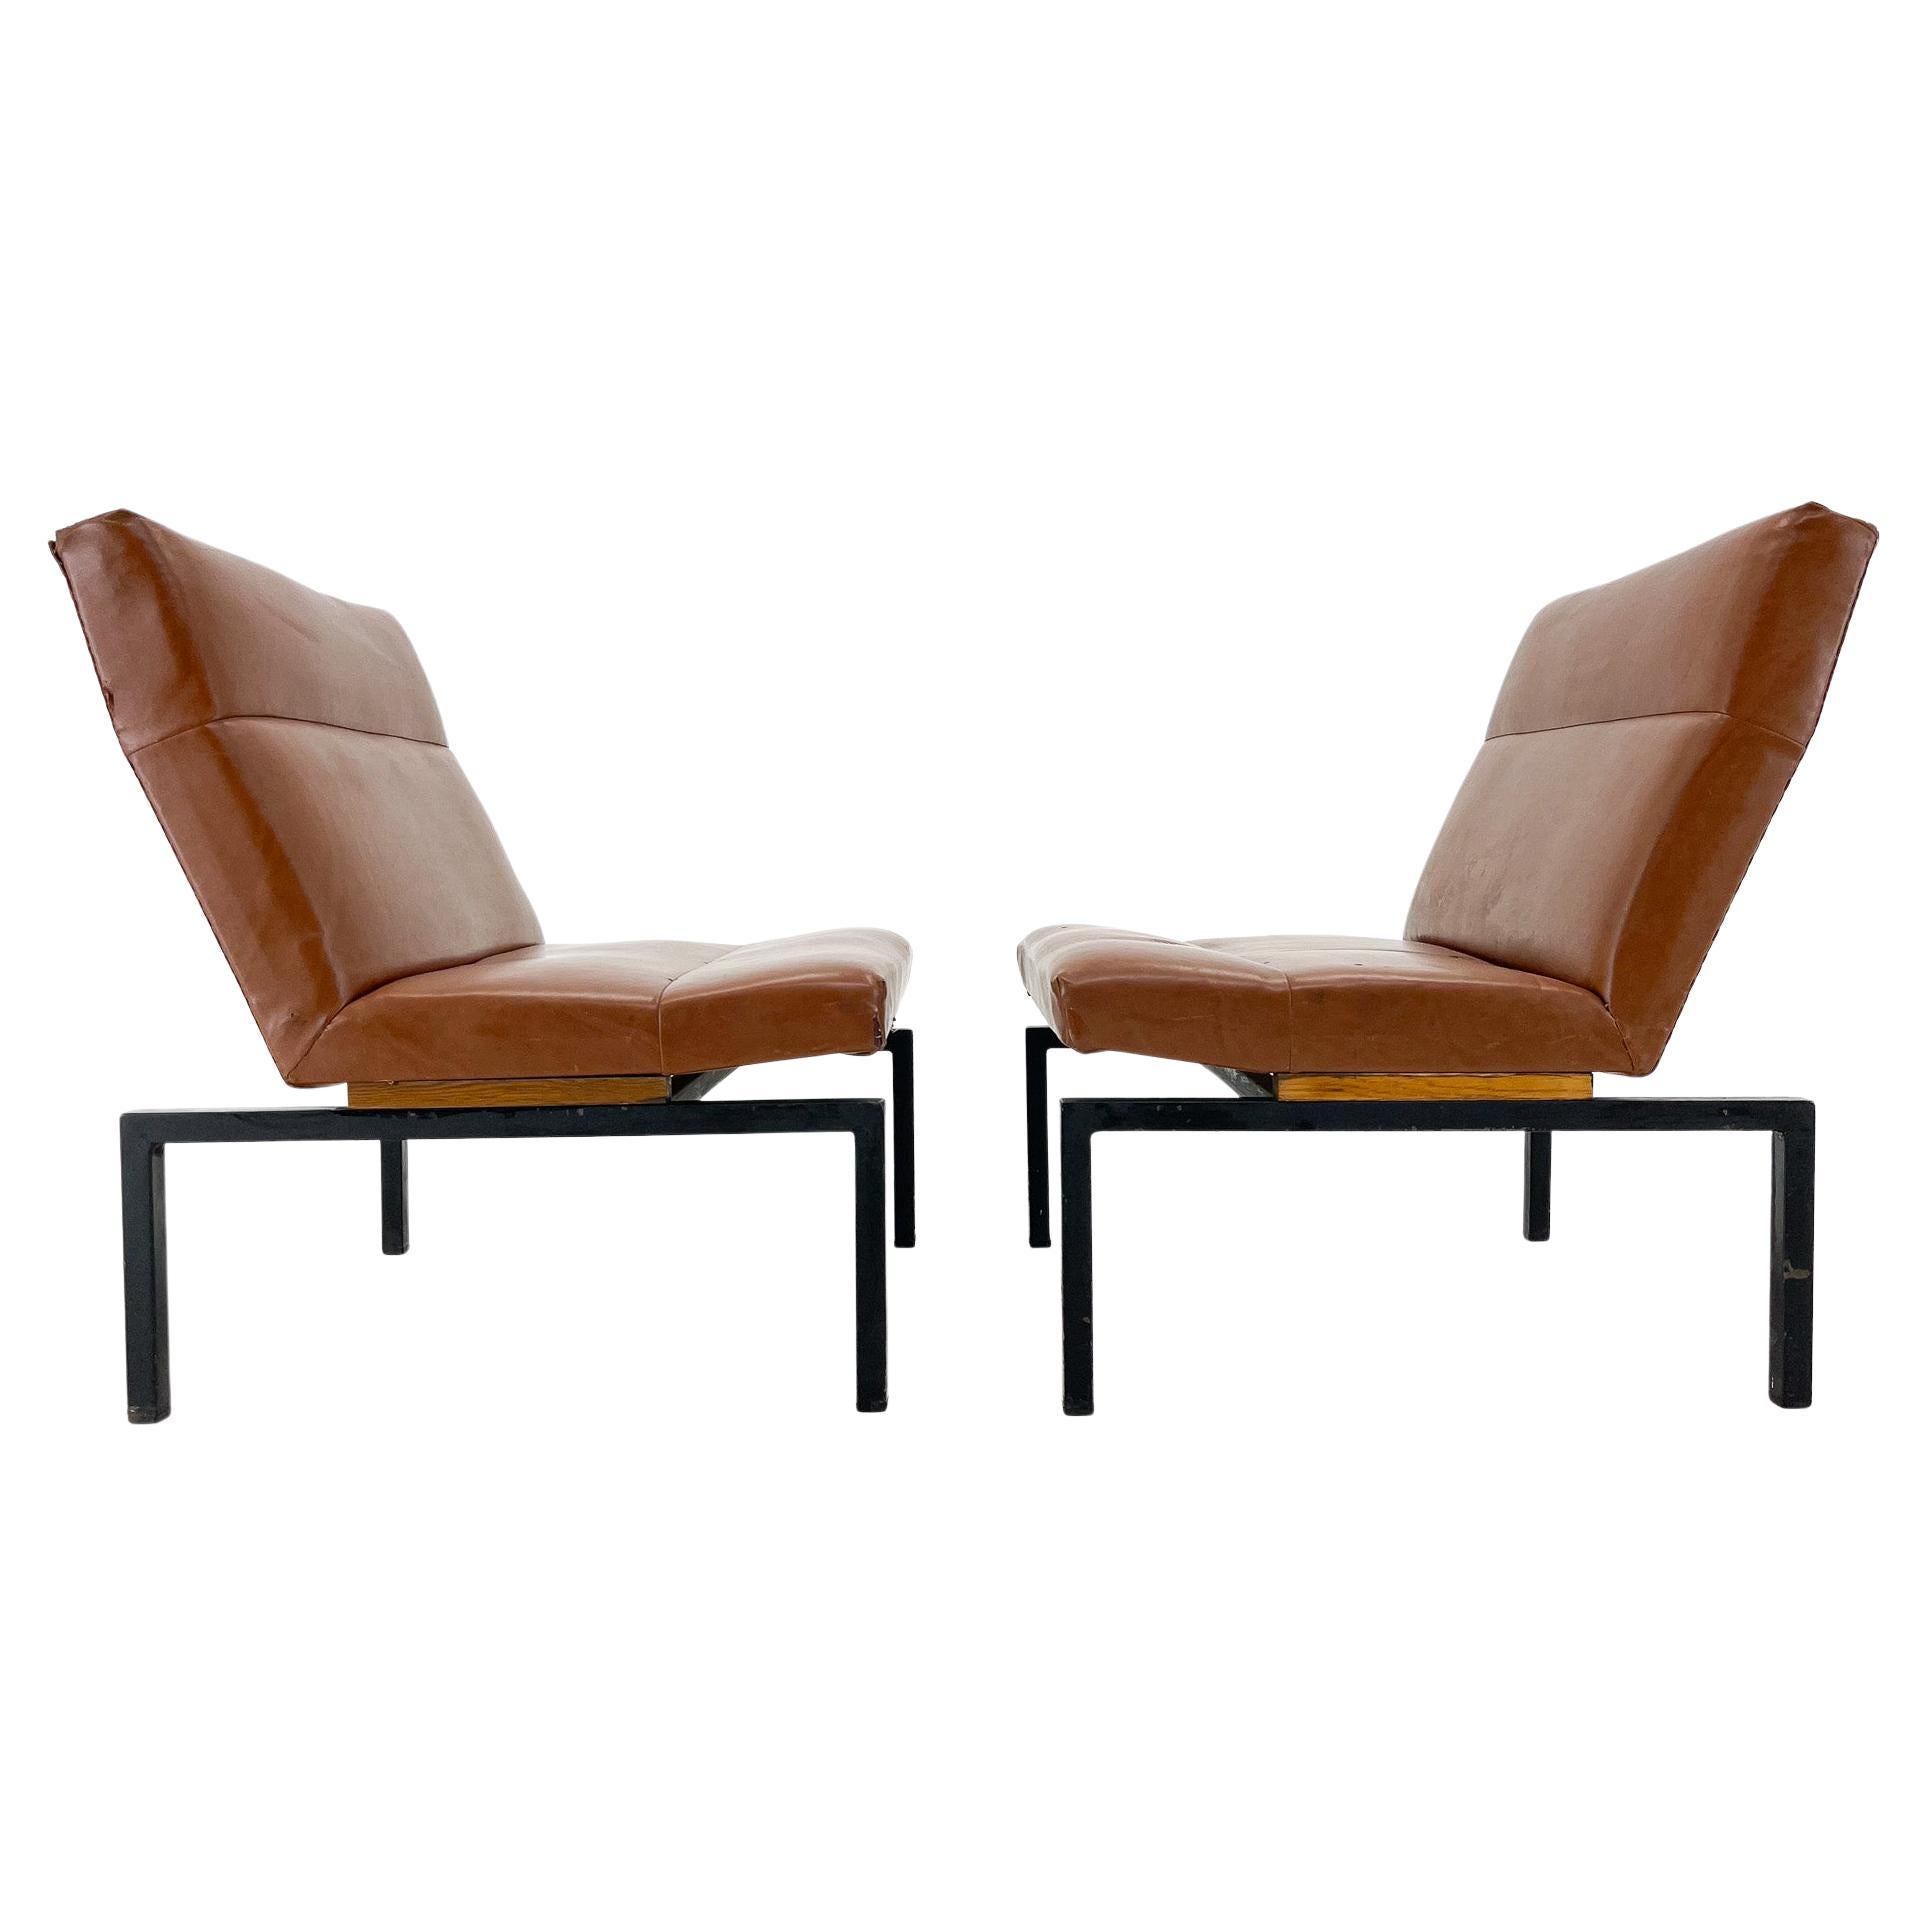 Midcentury Faux Leather & Metal Lounge Chairs, 2 Pieces Available